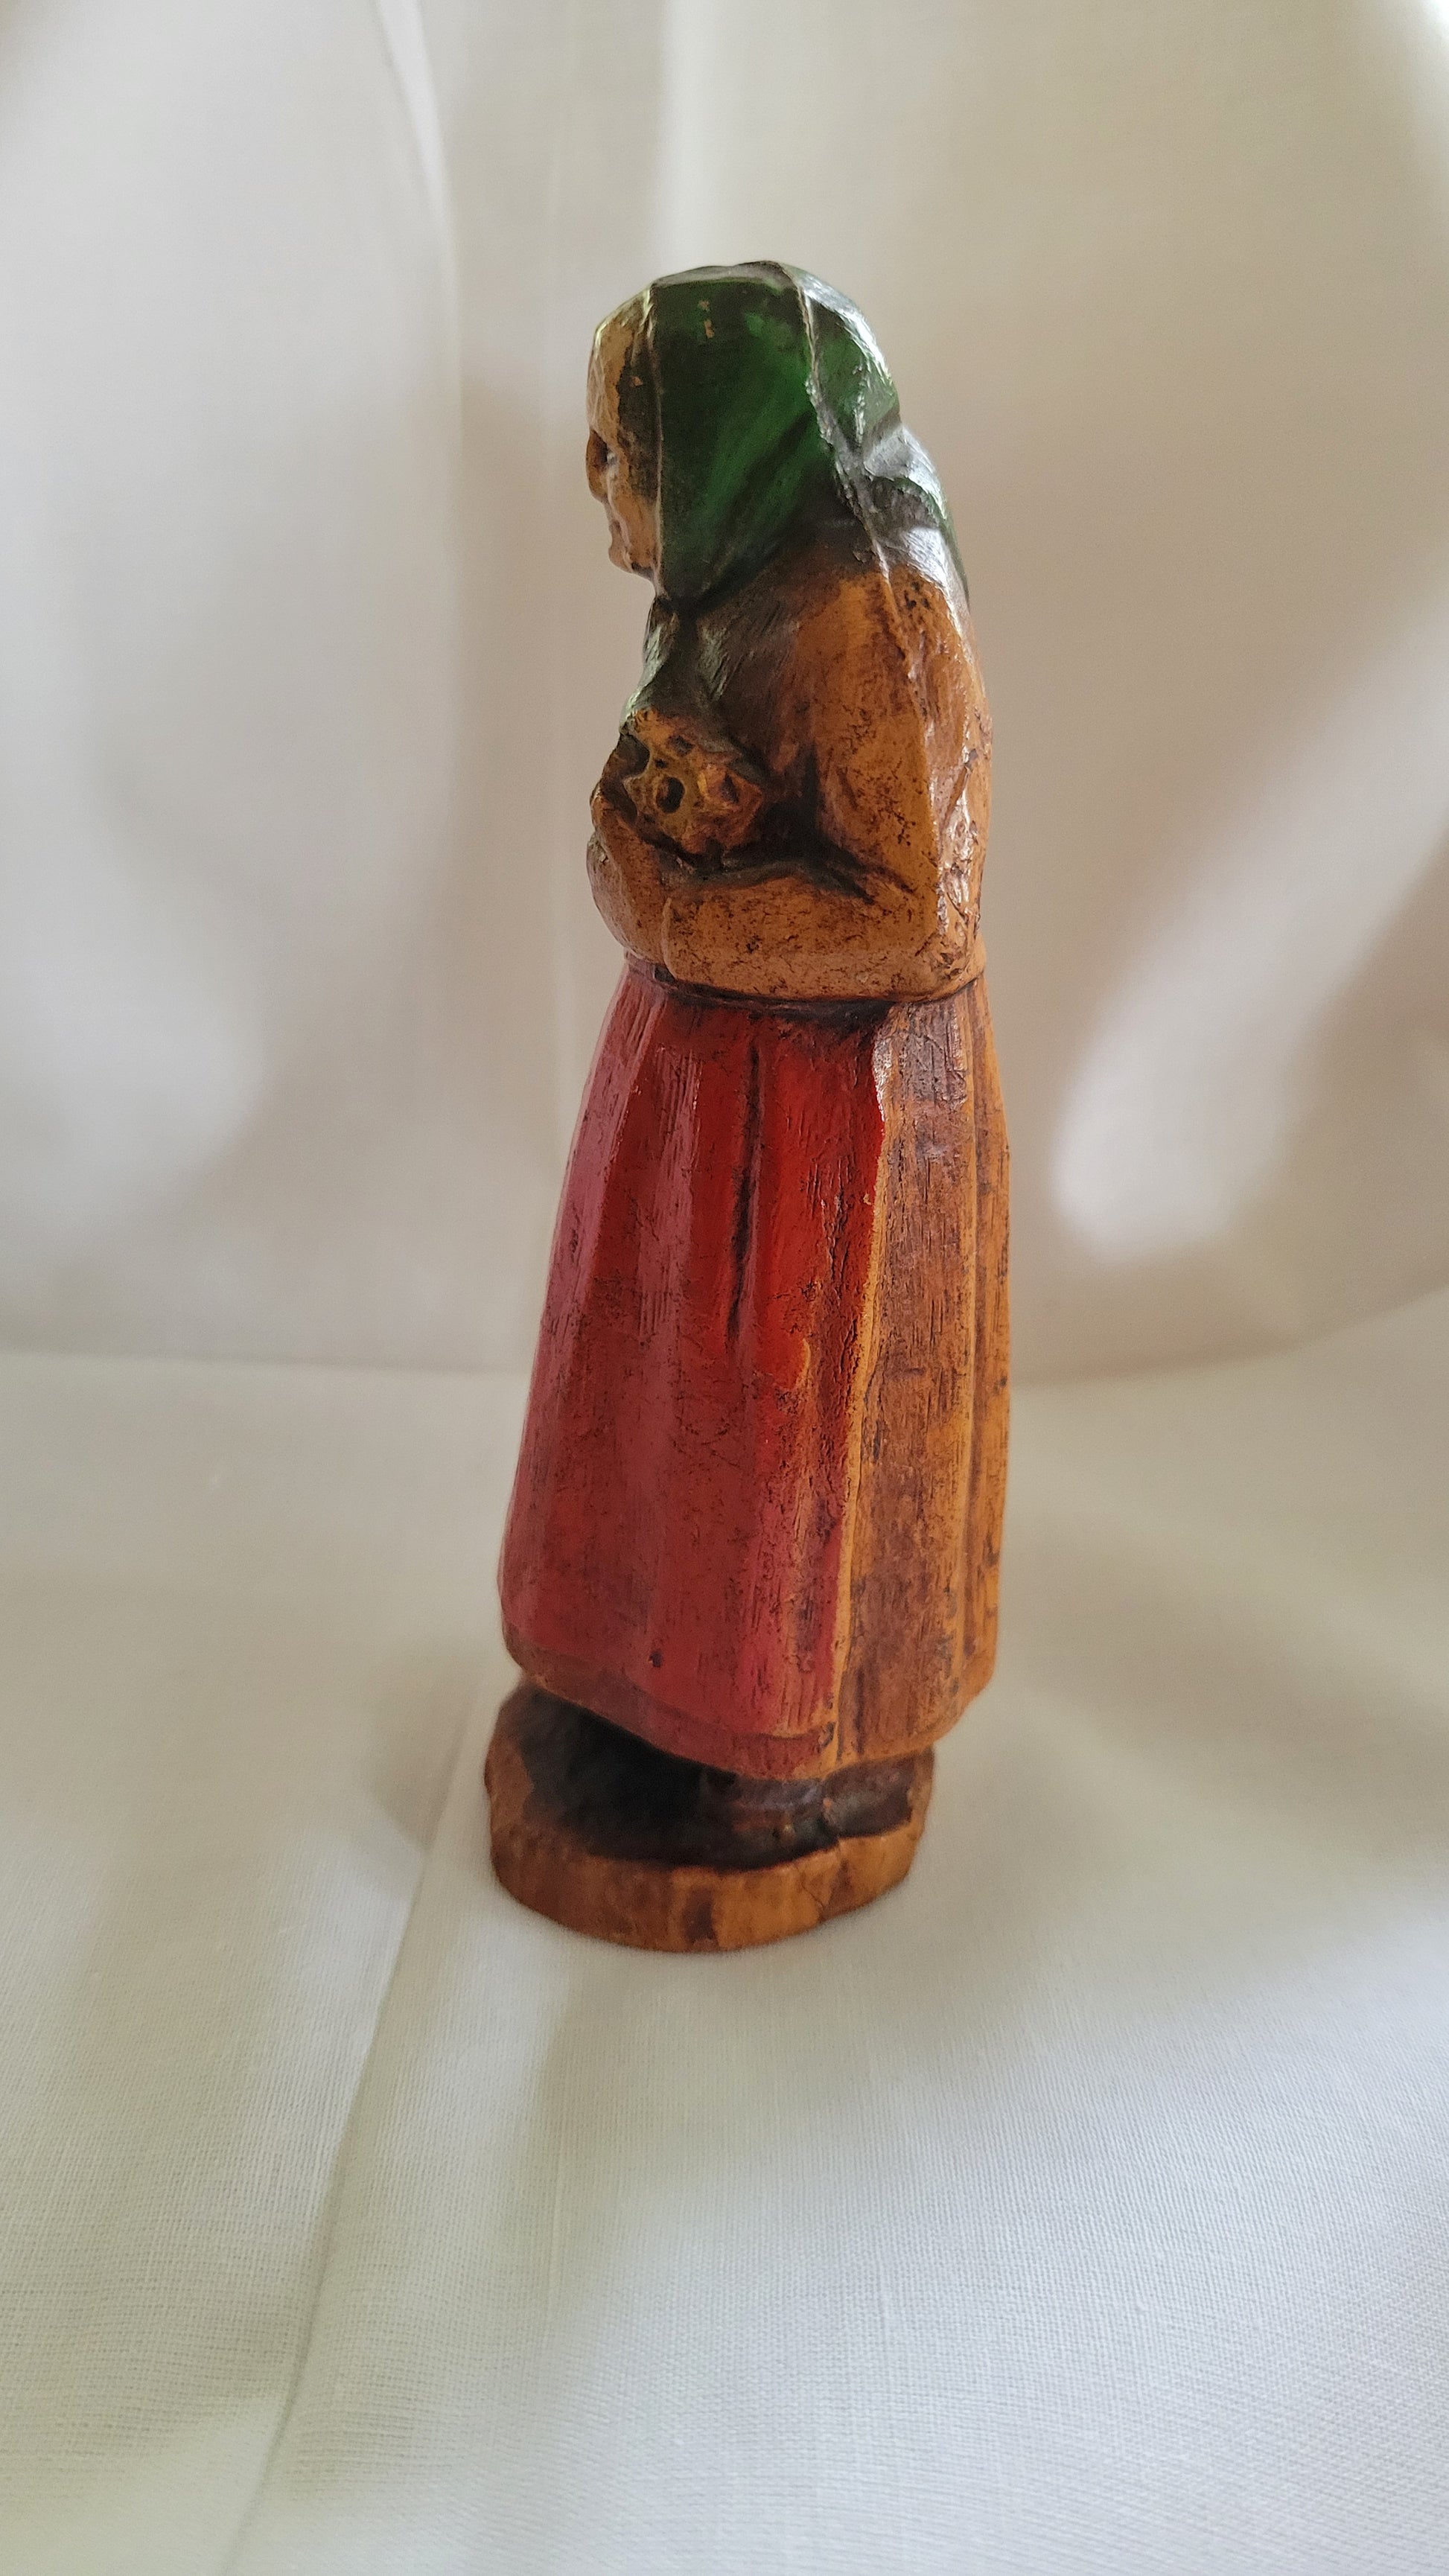 Small Jewish, Yiddish grandmother or Bubbe figure, antique, holding Jewish Bible, possibly SyrocoWood. Left view.